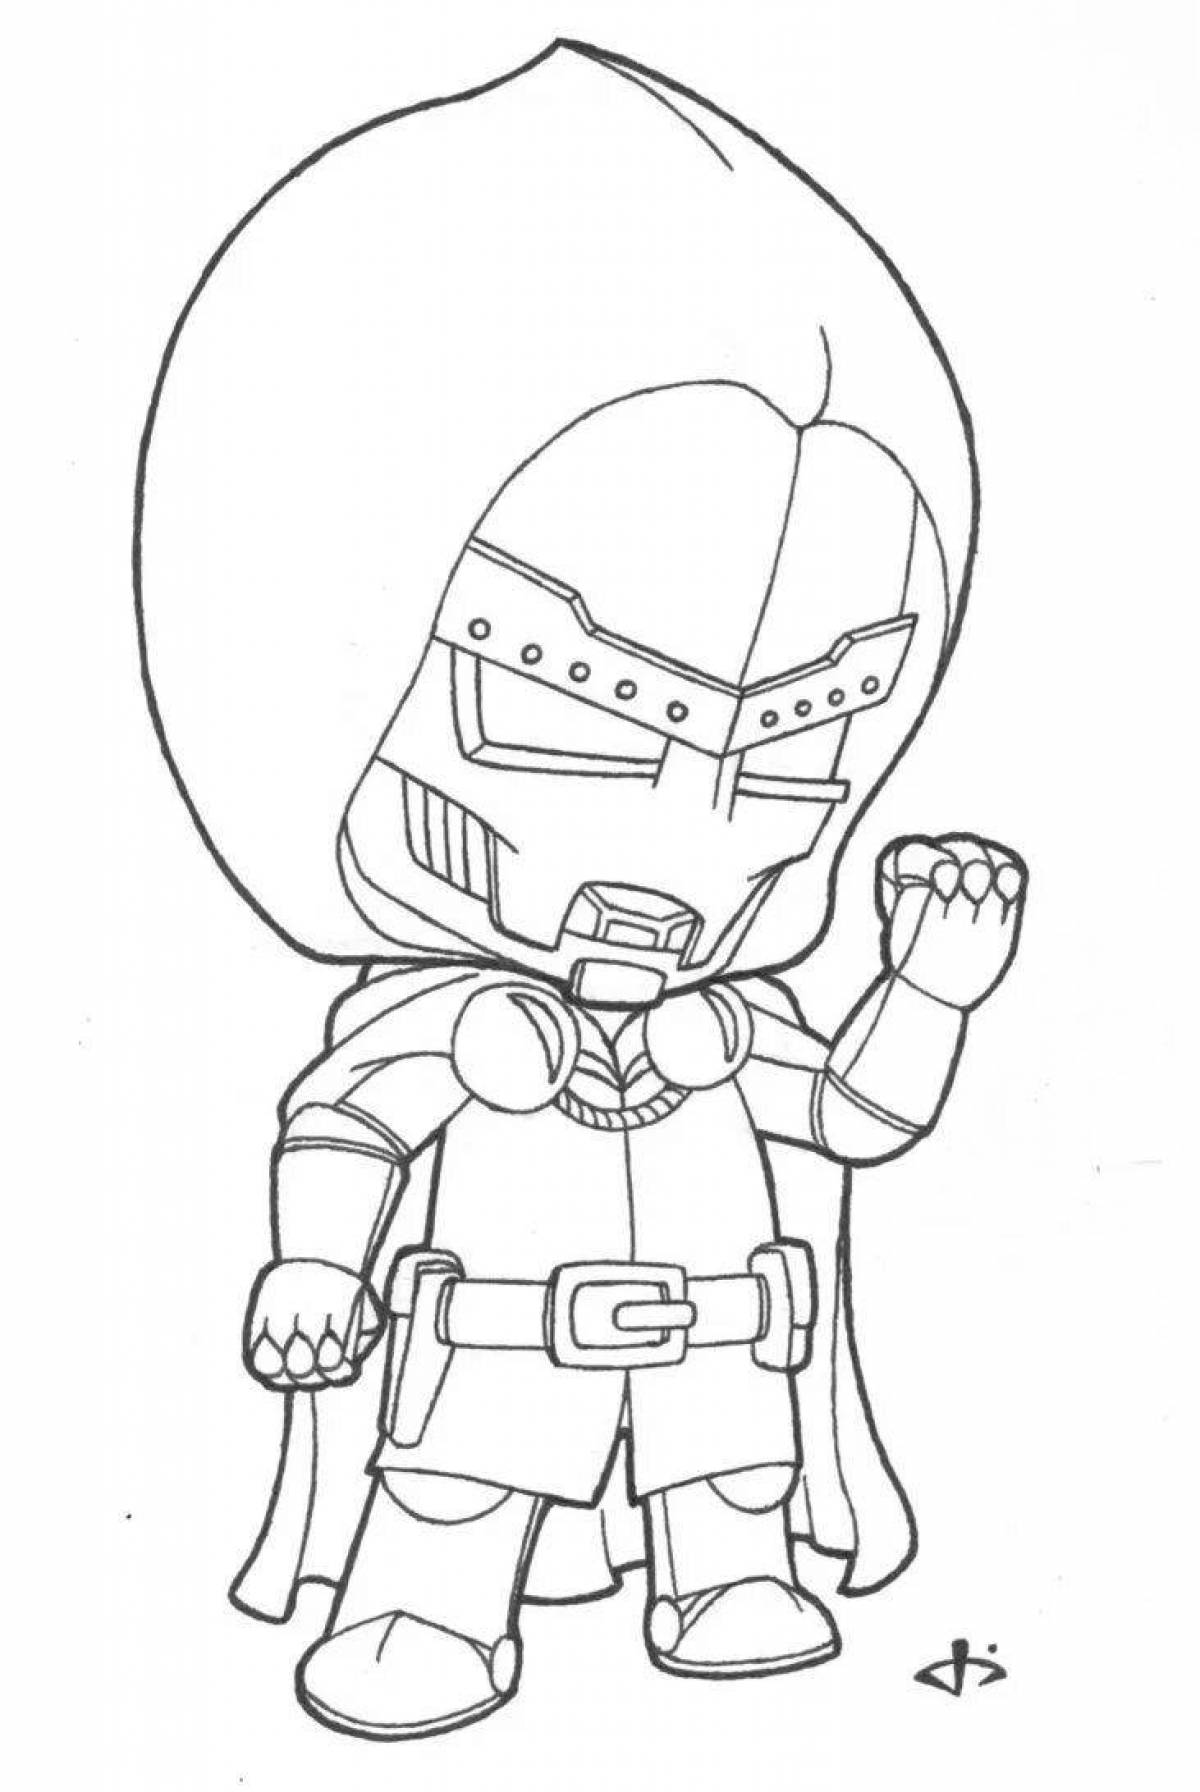 Colorful coloring book superheroes small